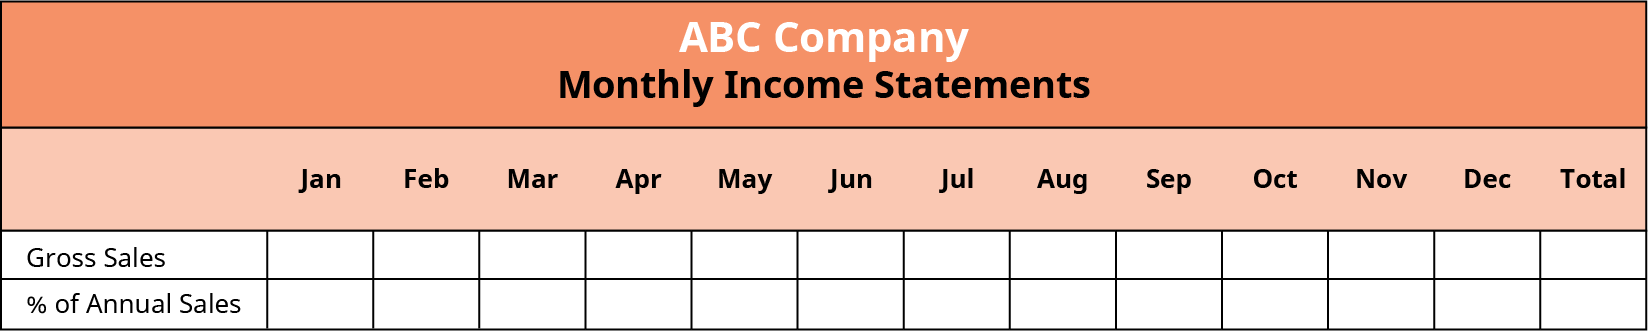 Monthly income statement of ABC company shows empty cells for gross sales on a monthly basis and the percentage of annual sales.